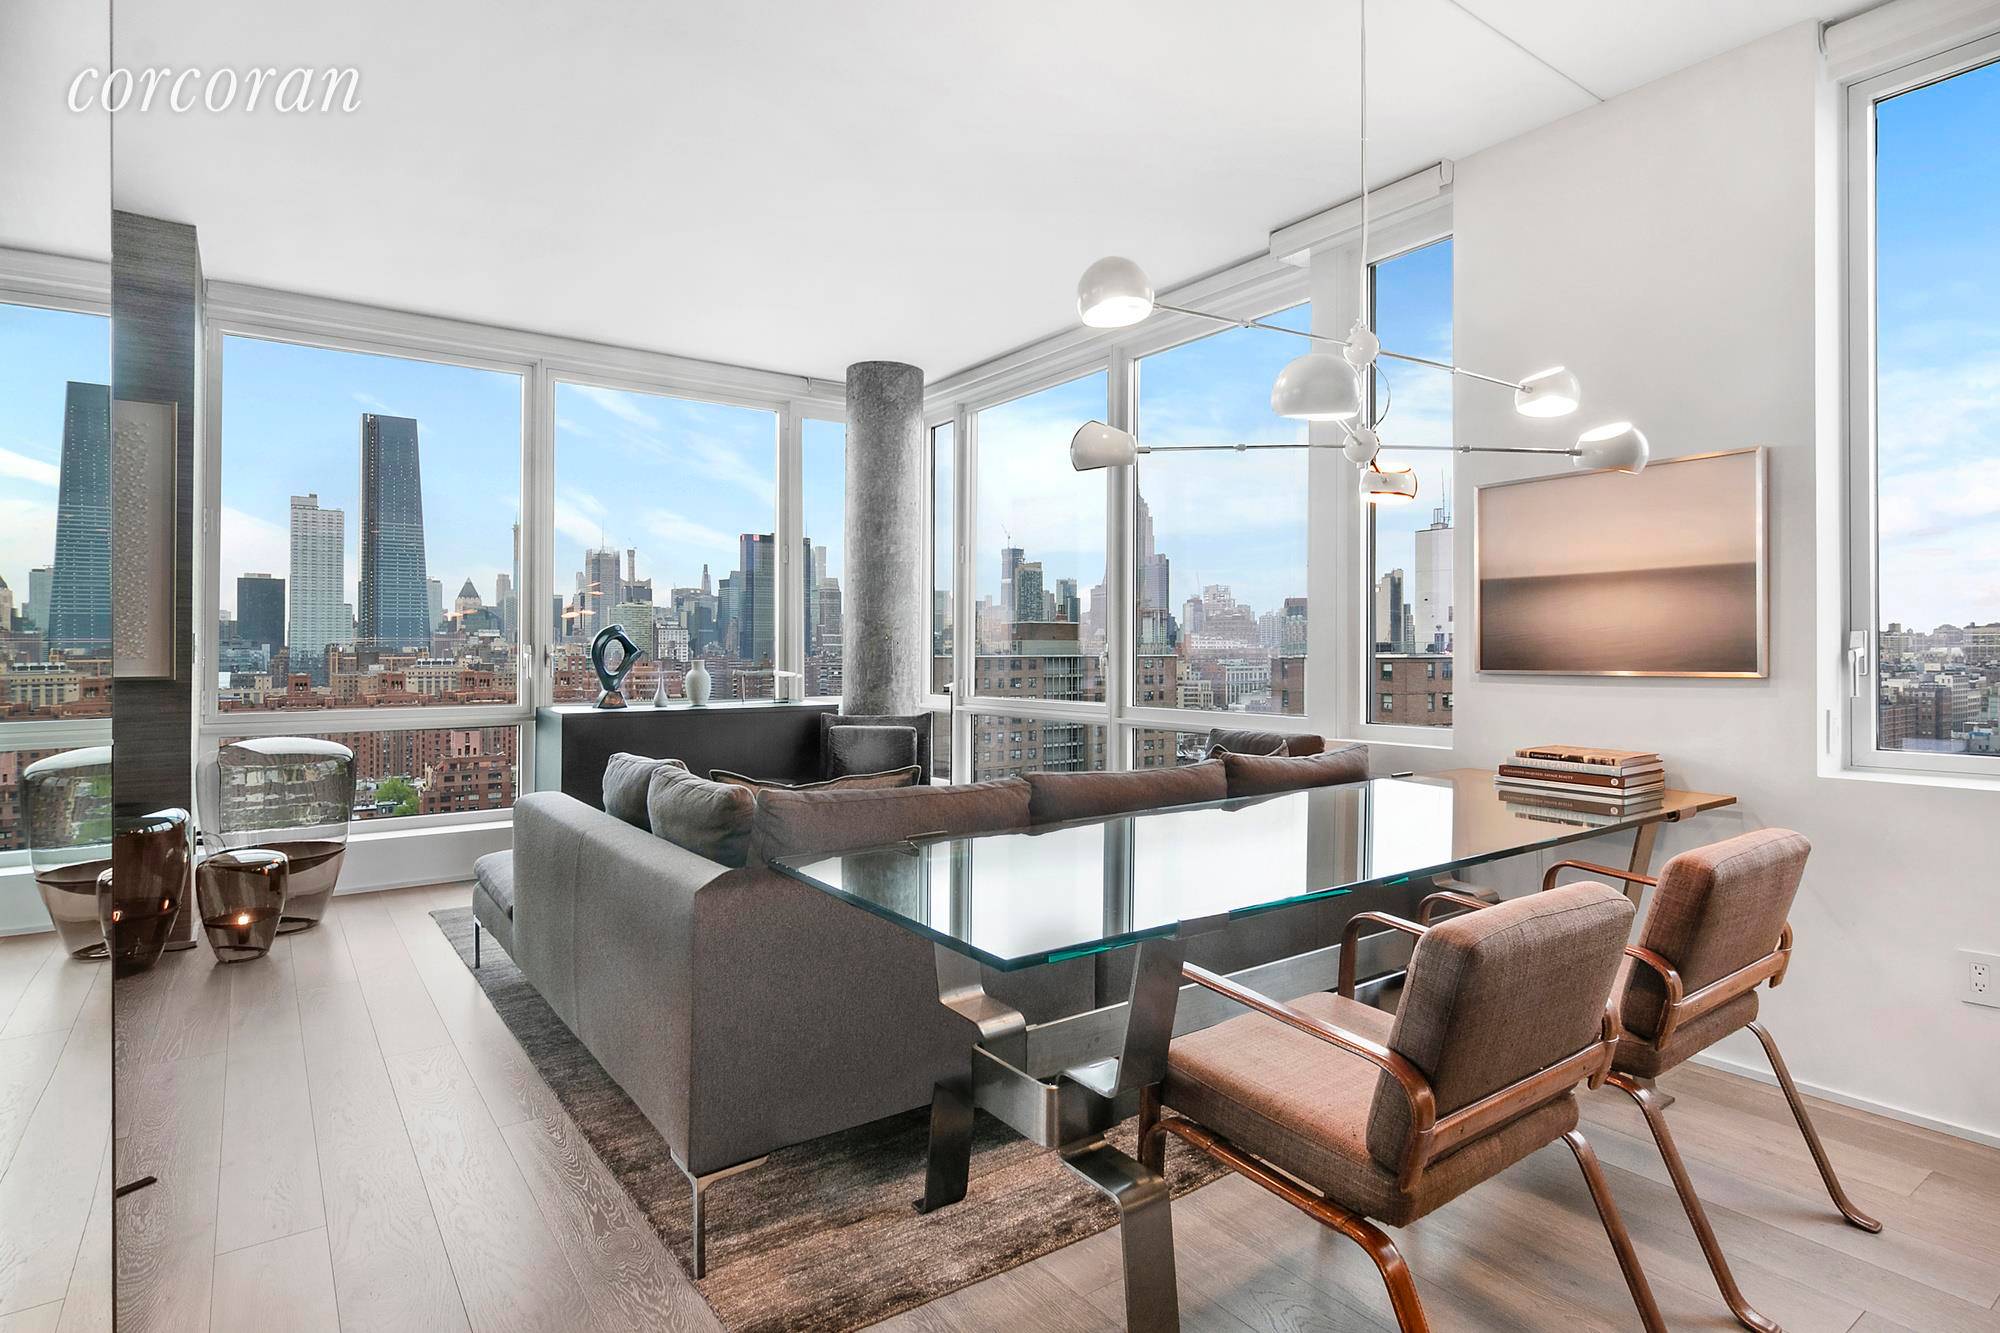 Residence 2403 is an elegantly renovated corner 2 bedroom, 2 bathroom with amazing views over Chelsea to Hudson Yards, Empire State Building, Hudson River and the Worldtrade Center.